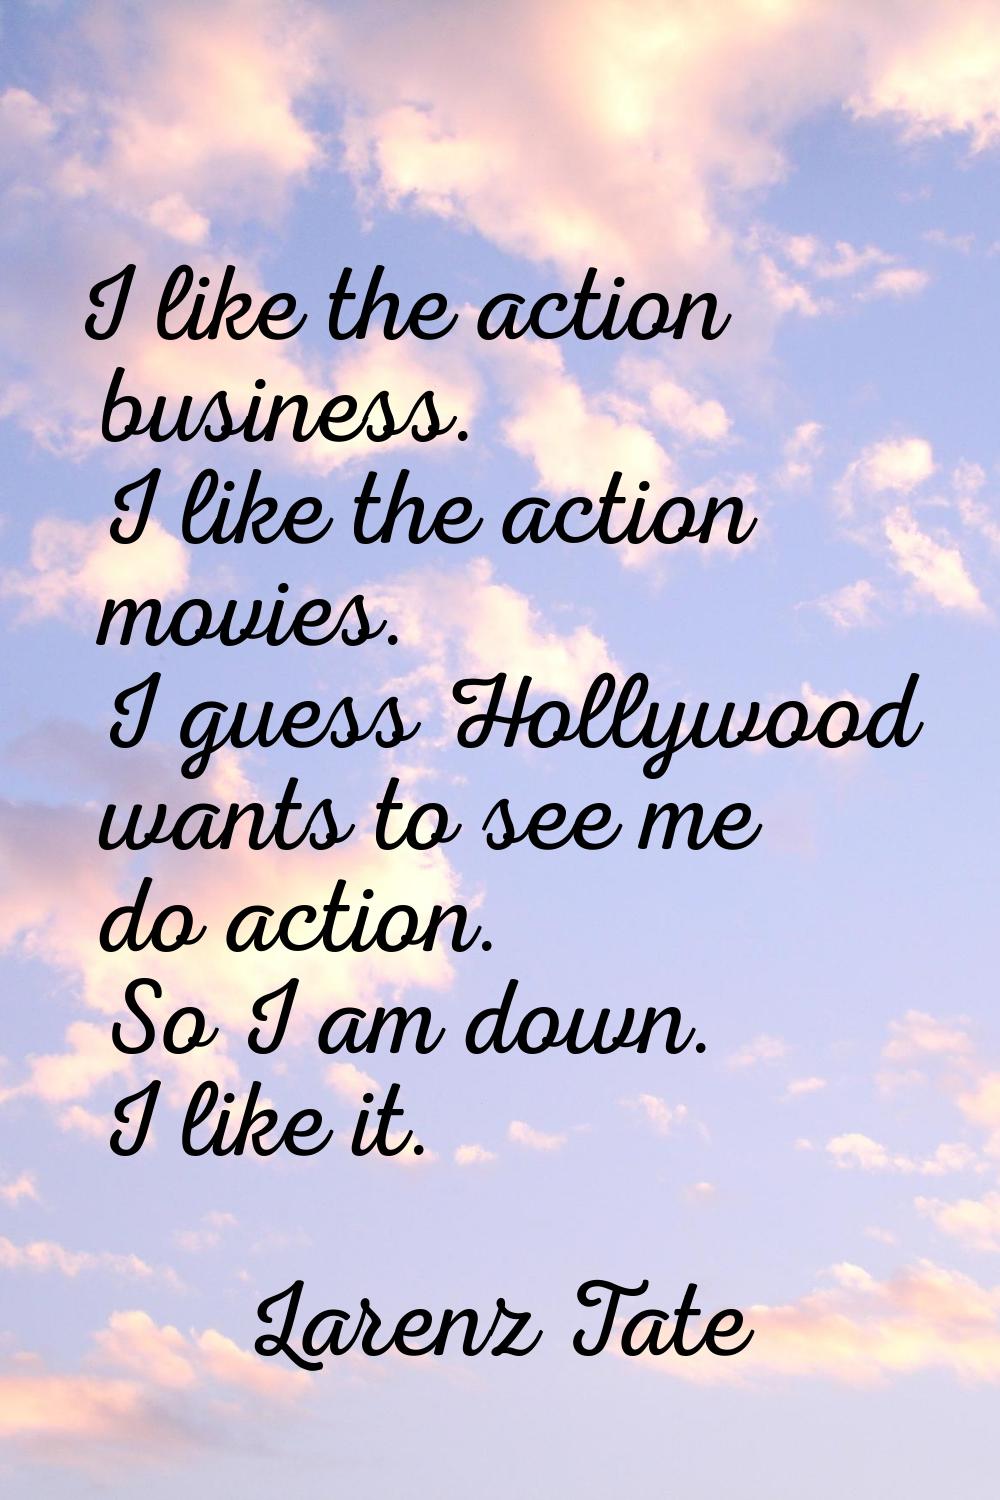 I like the action business. I like the action movies. I guess Hollywood wants to see me do action. 